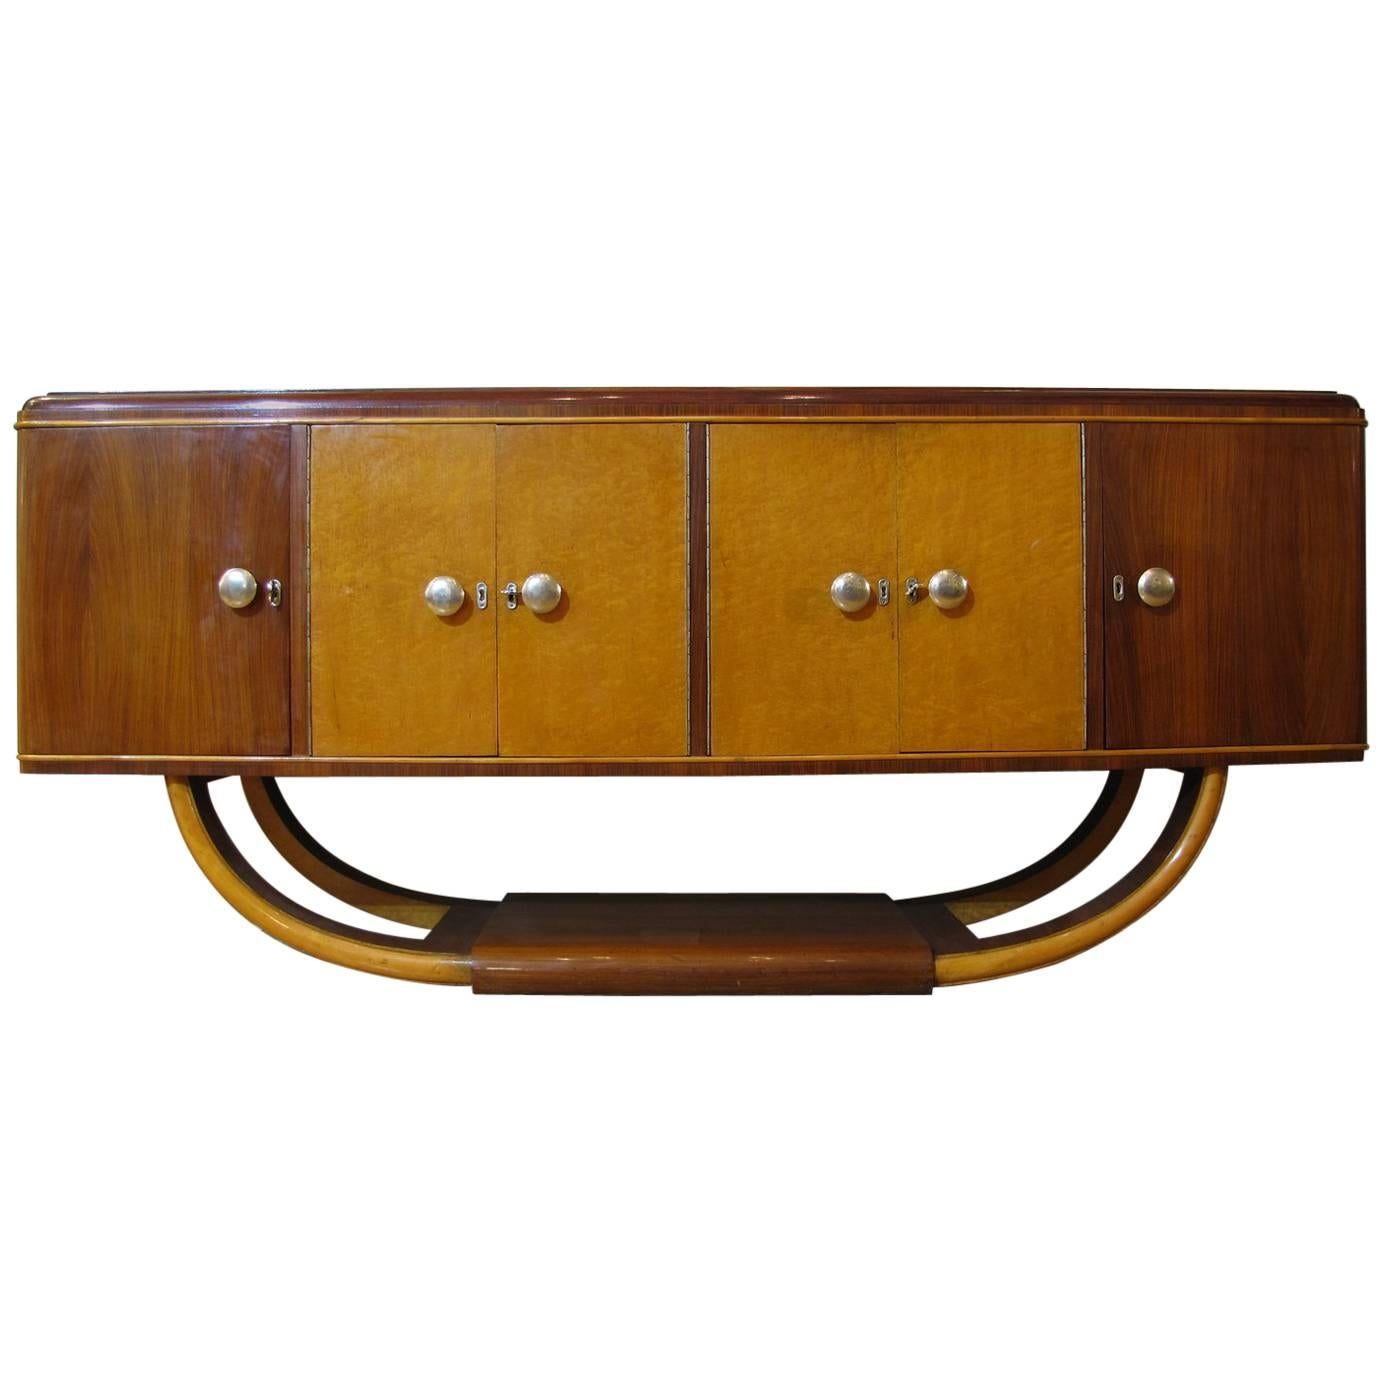 Italian Mid-20th Century Art Deco Credenza or Buffet in Palisander and Maple